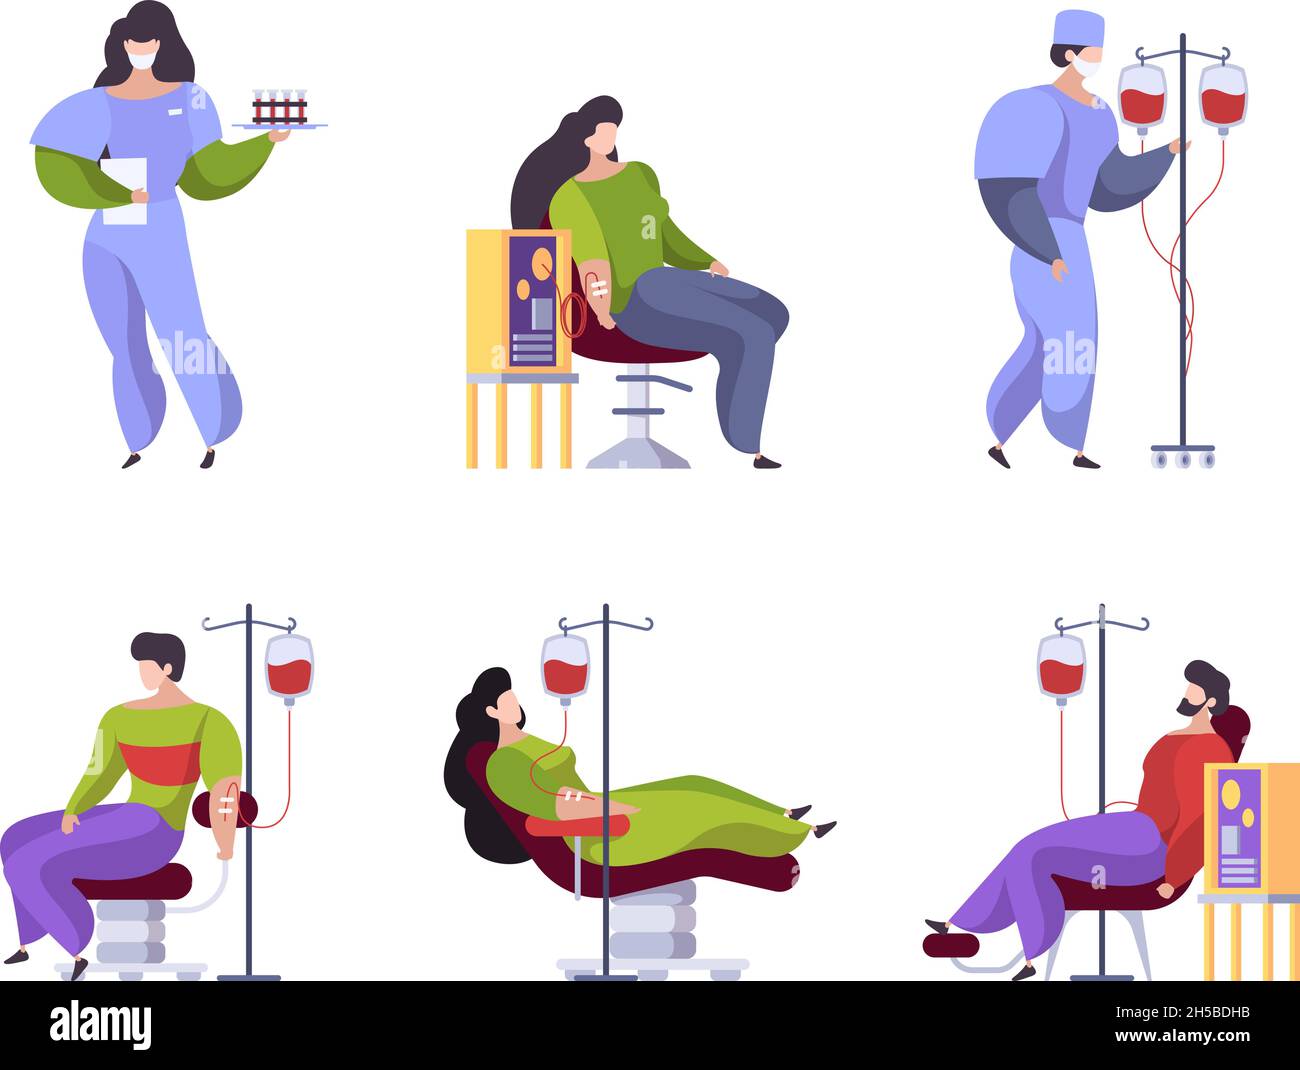 Blood donation. Hospital medical care people on chair confident medical donation garish vector flat stylized characters Stock Vector